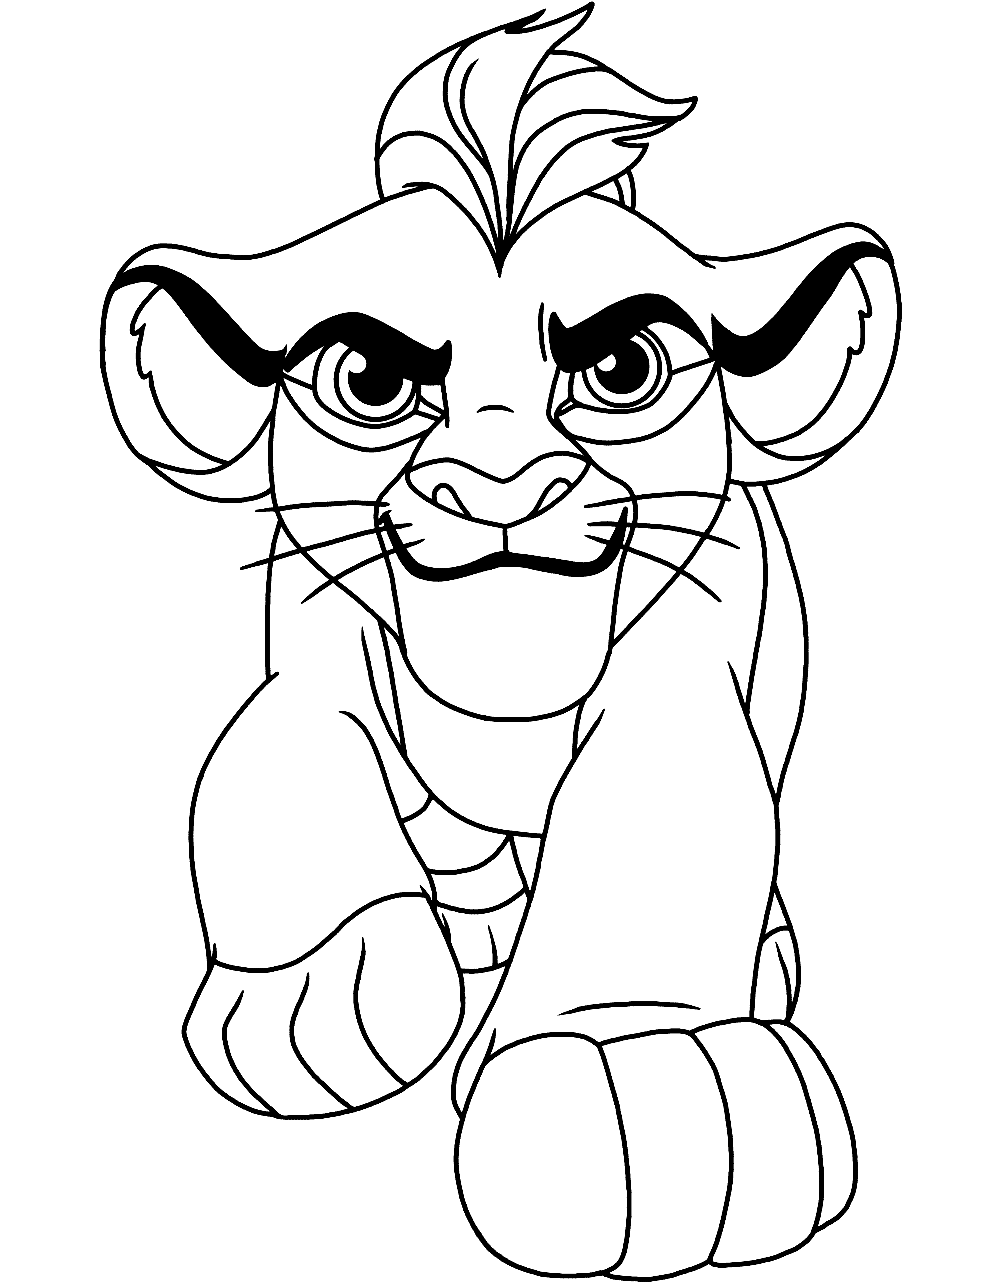 Kion Walking Coloring Pages